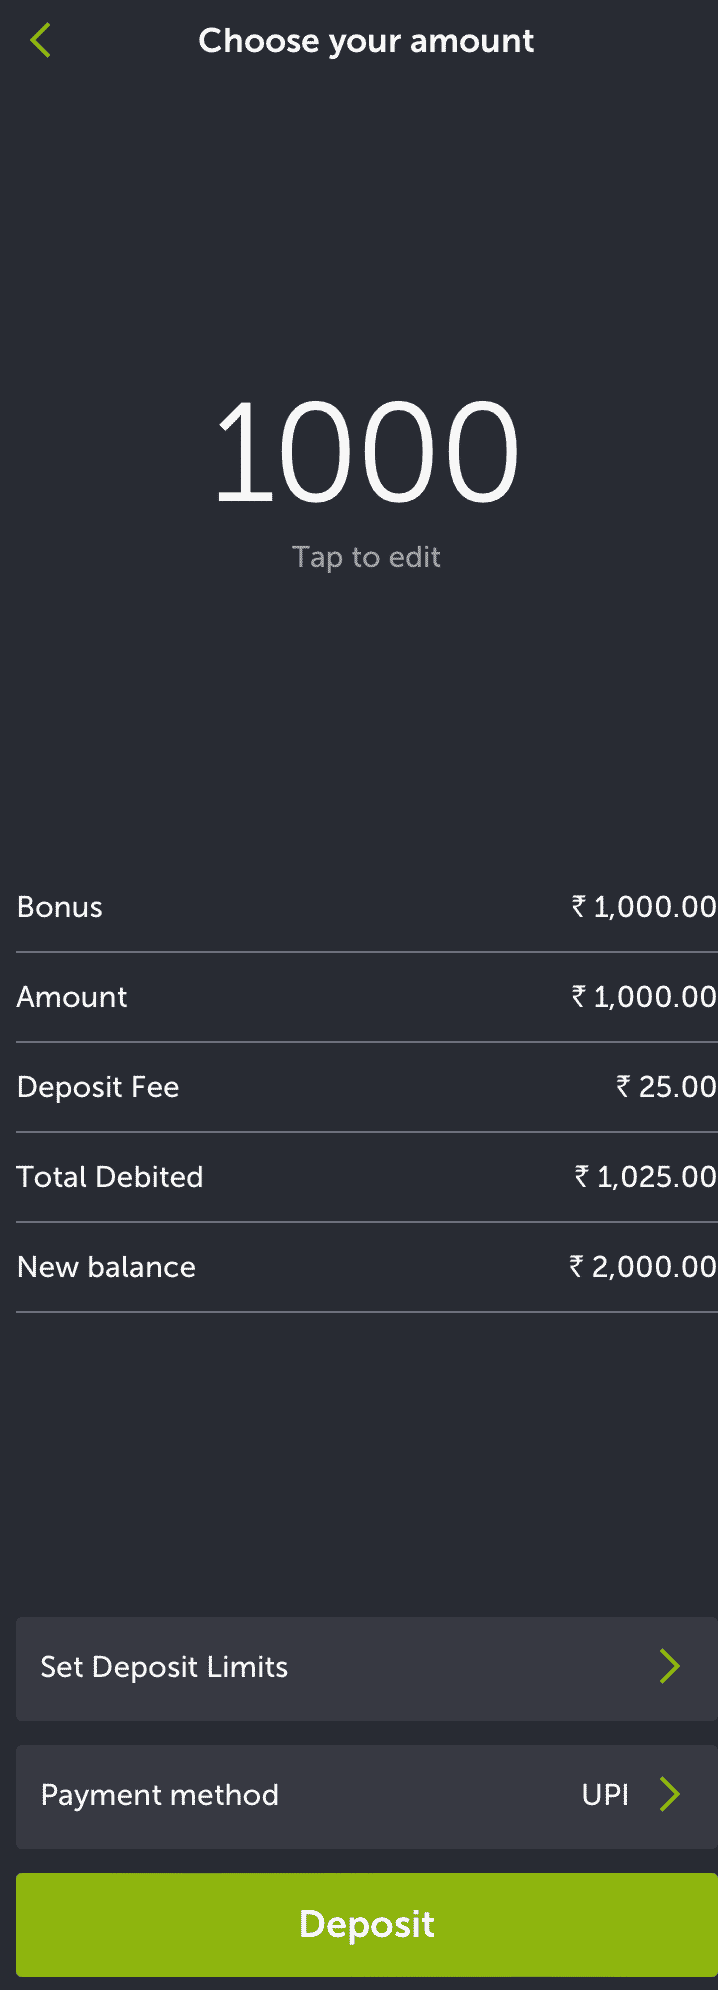 Choose how much to deposit.